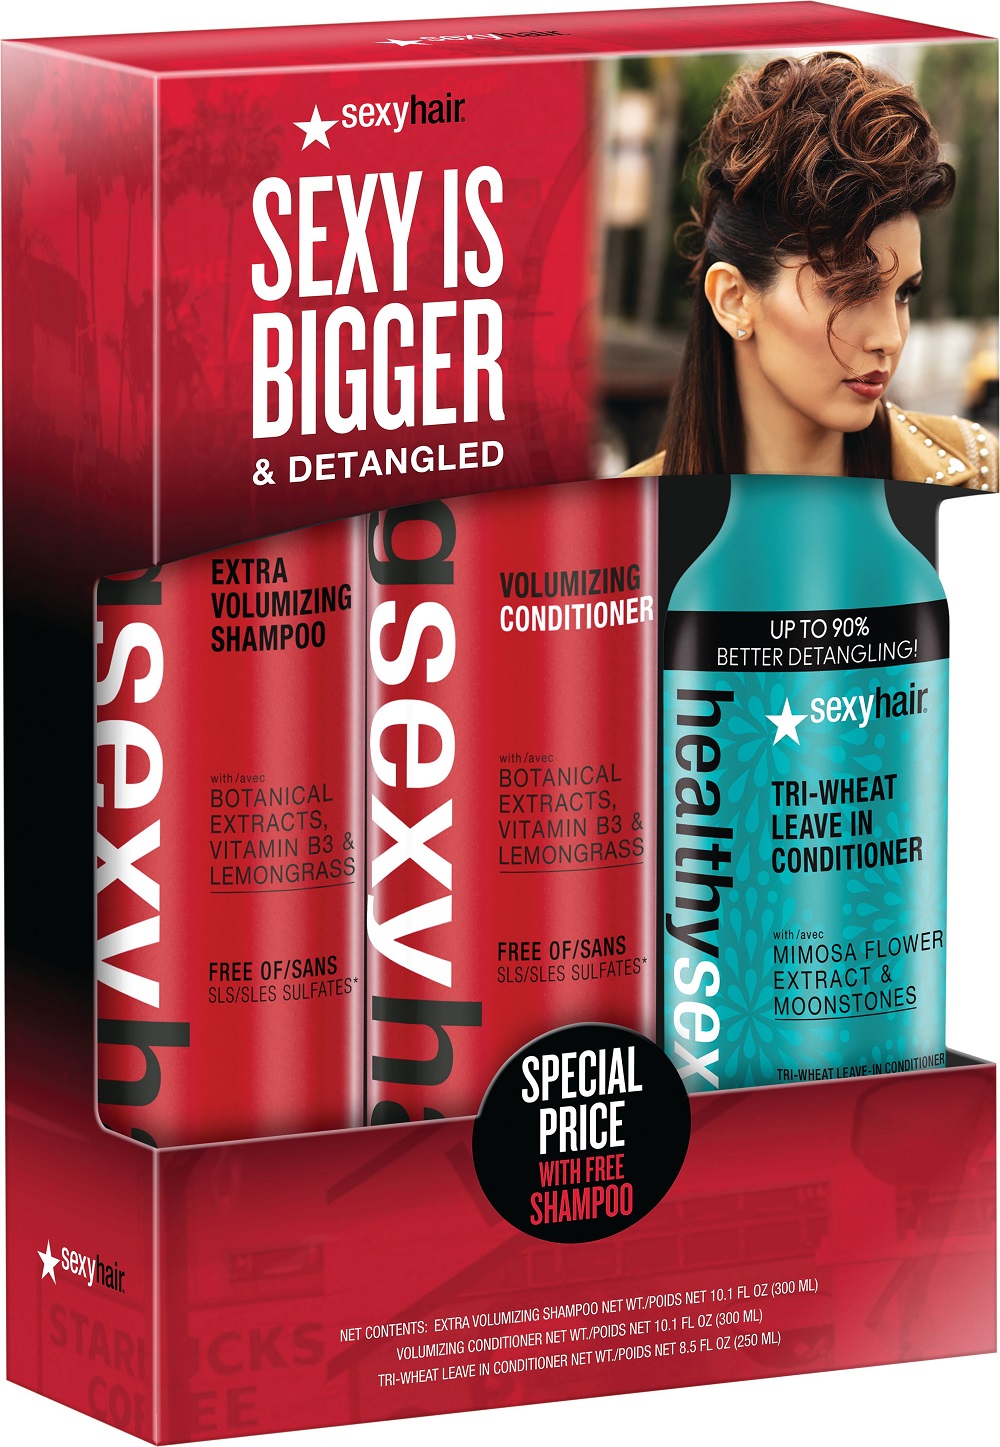 Sexy Hair Sexy IS BIGGER & DETANGLED Gift Pack